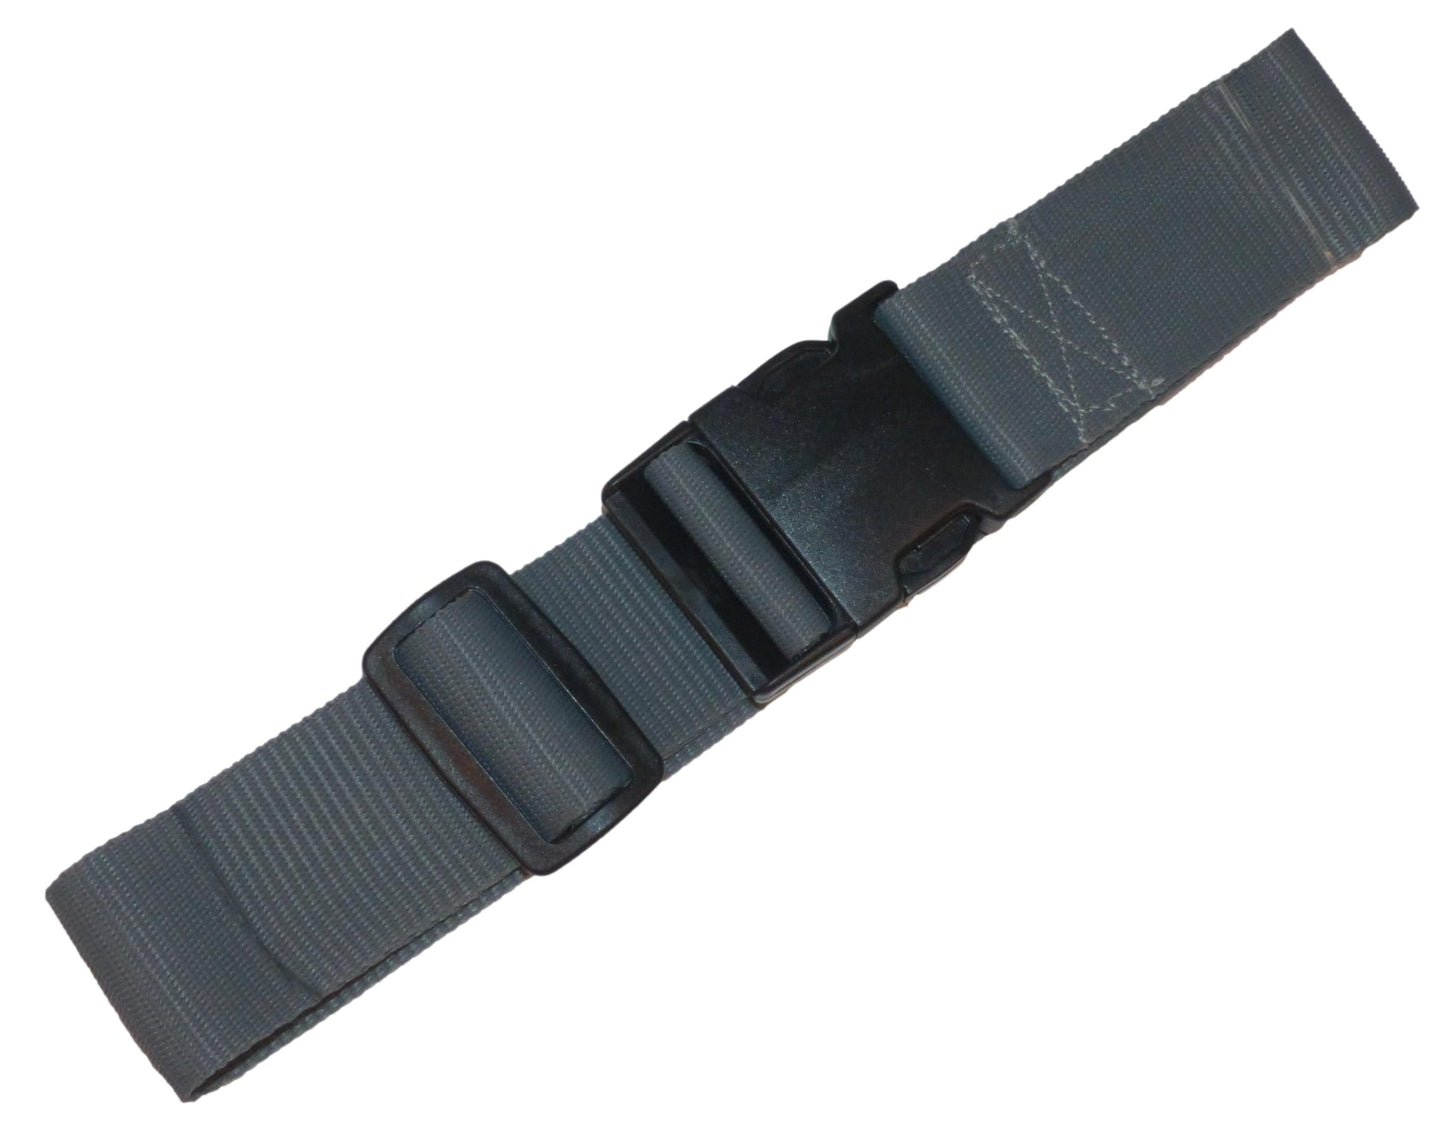 Benristraps 50mm Webbing Strap with Quick Release Buckle in grey